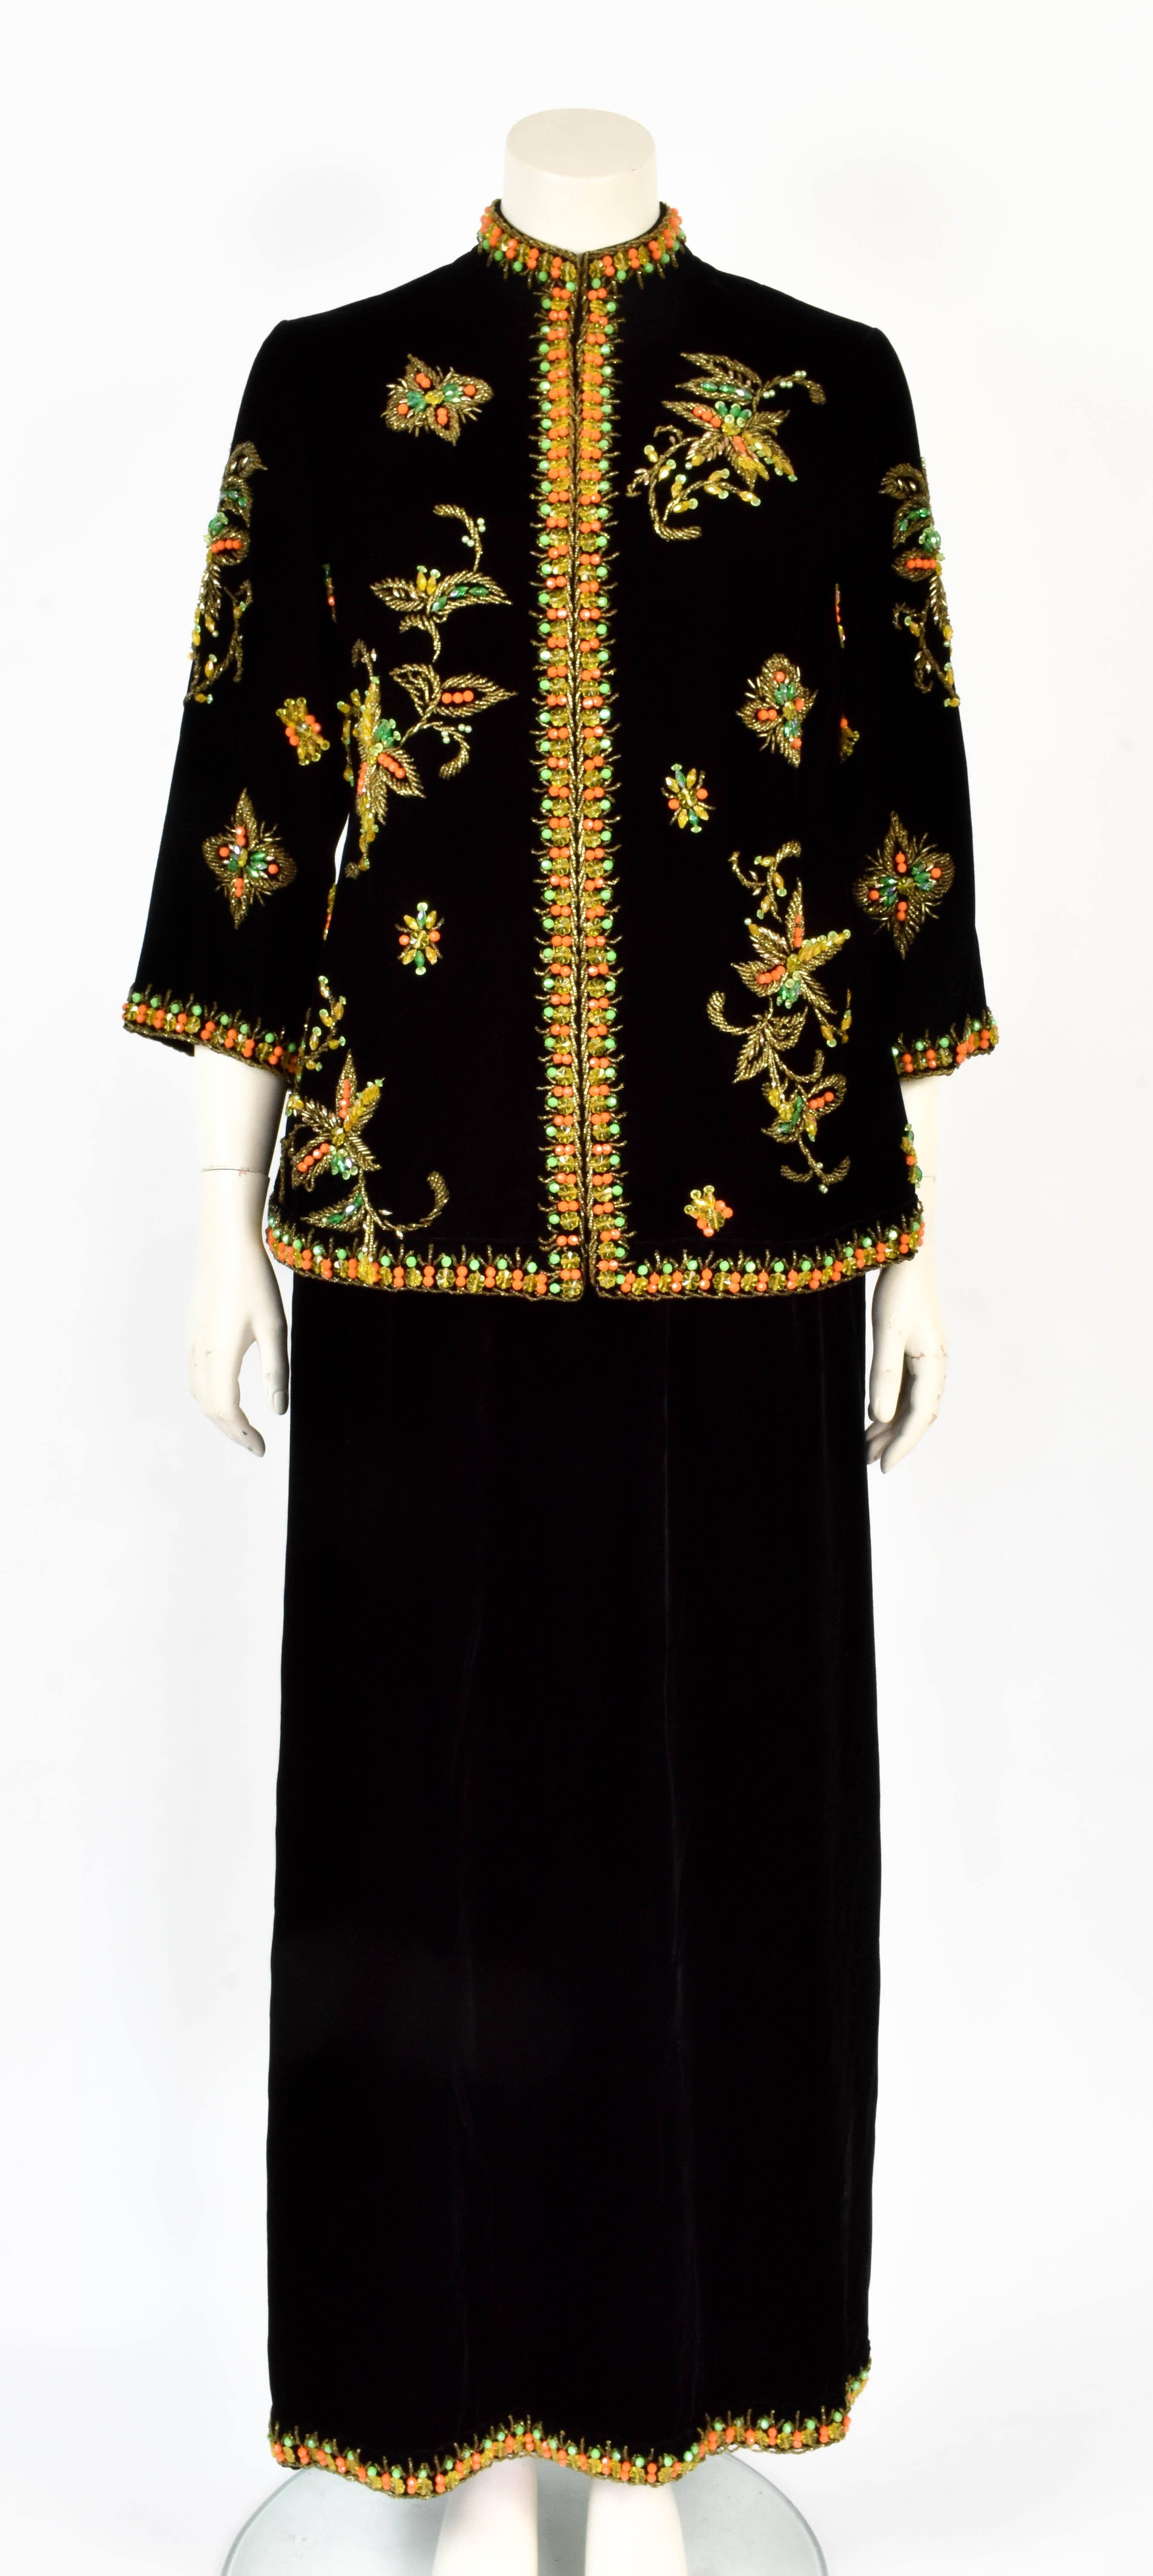 This Yves Saint Laurent ensemble consists of a skirt and a jacket. It is made from soft velvet and has exquisite beading attributed to Maison Lesage. A very rare and stunning piece. 

Size: XS or S

Jacket
Shoulder to Shoulder 40 cm /  15.8